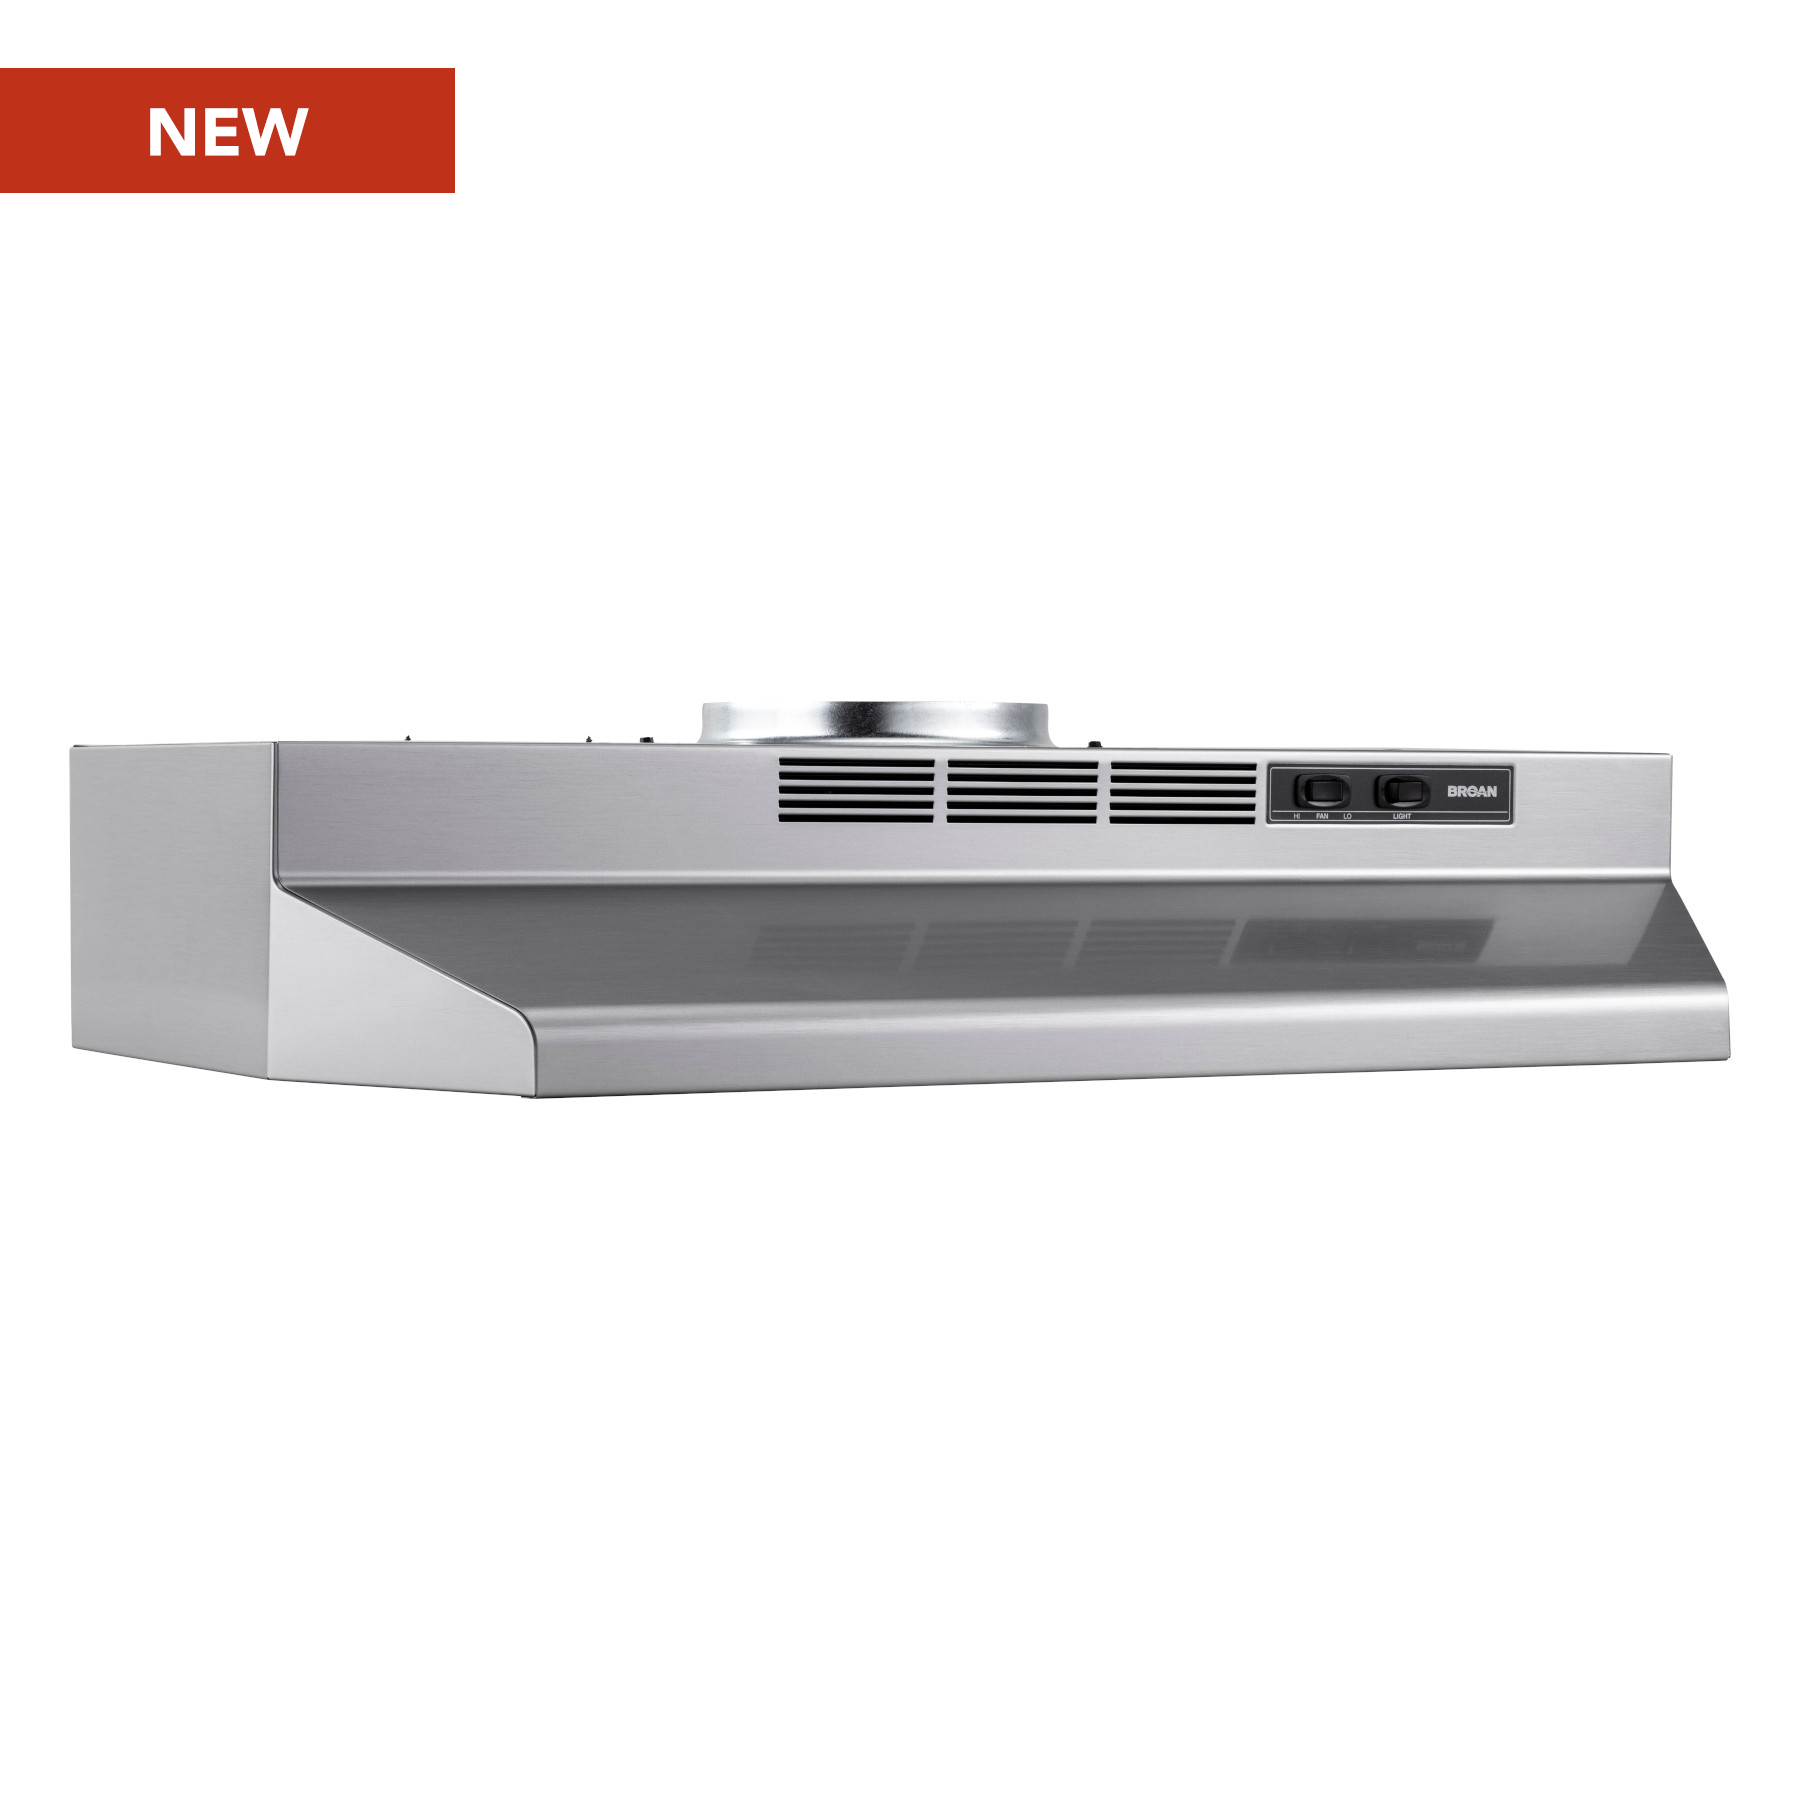 Broan® 30-Inch Convertible Under-Cabinet Range Hood, Stainless Finish with PrintGuard, 230 MAX Blower CFM